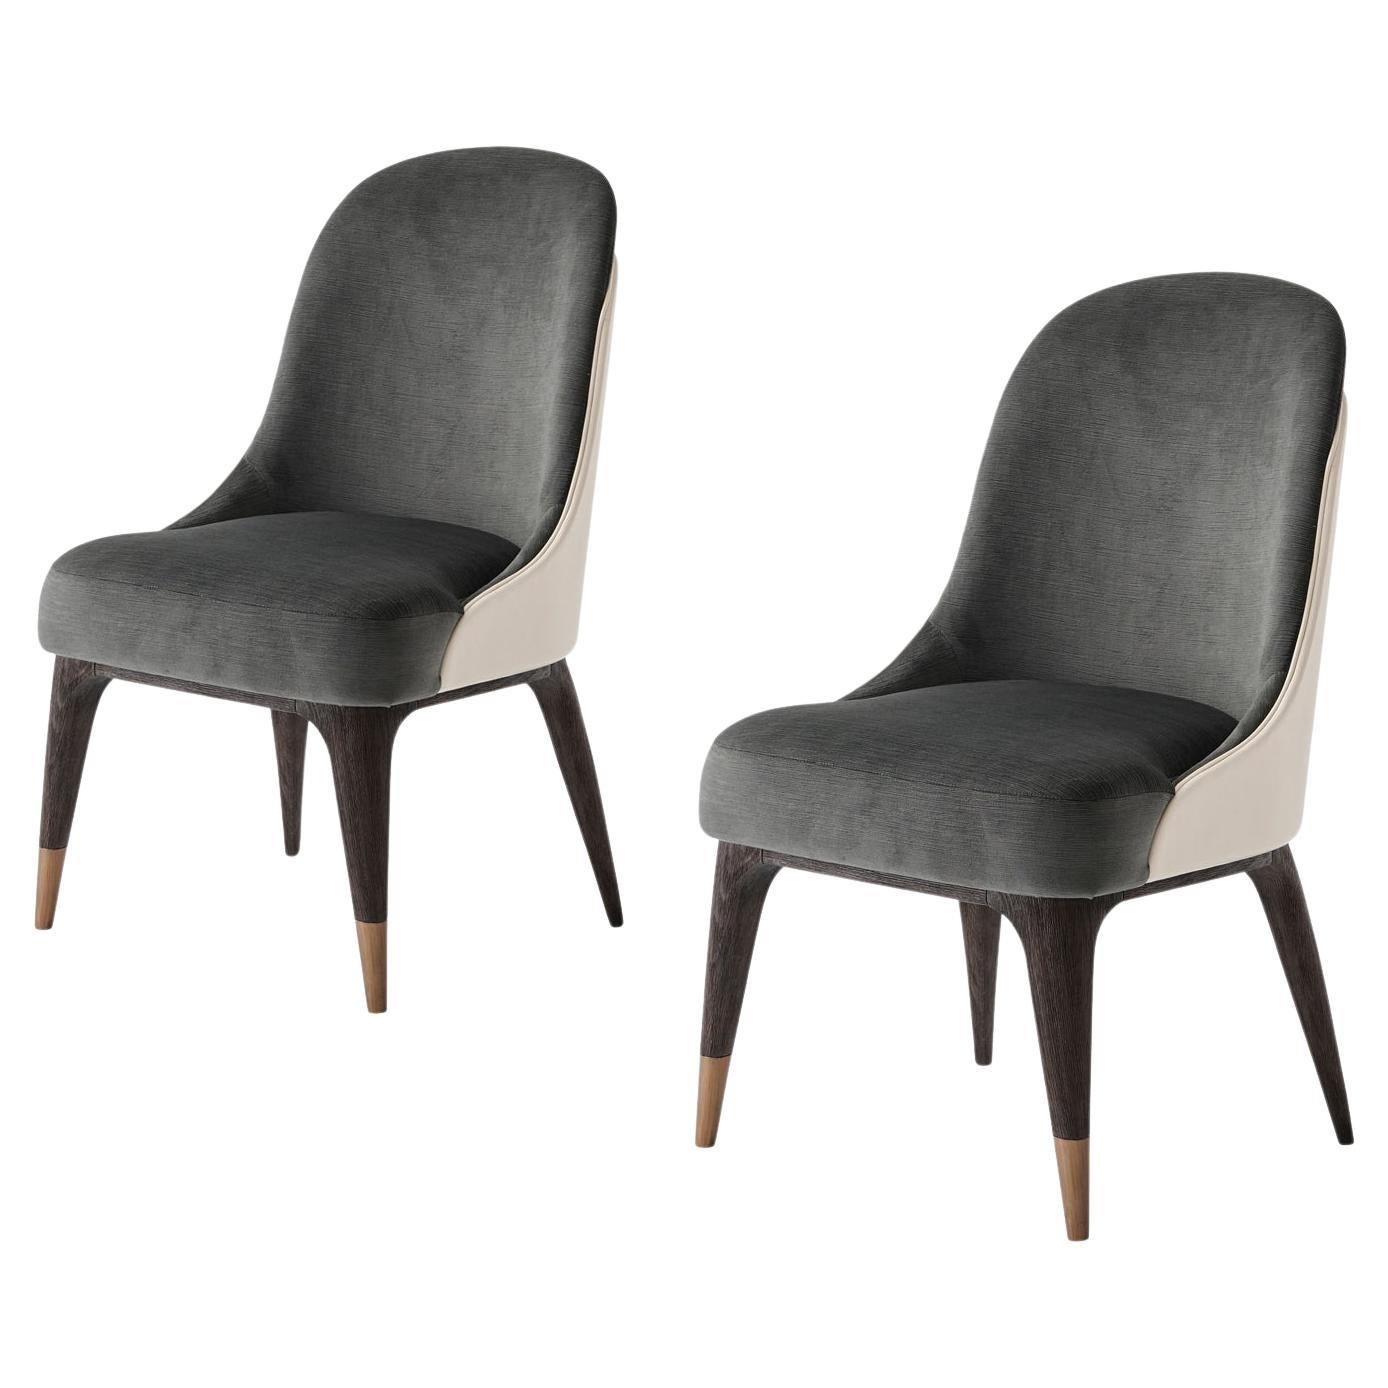 Covet Modern Dining Chairs For Sale